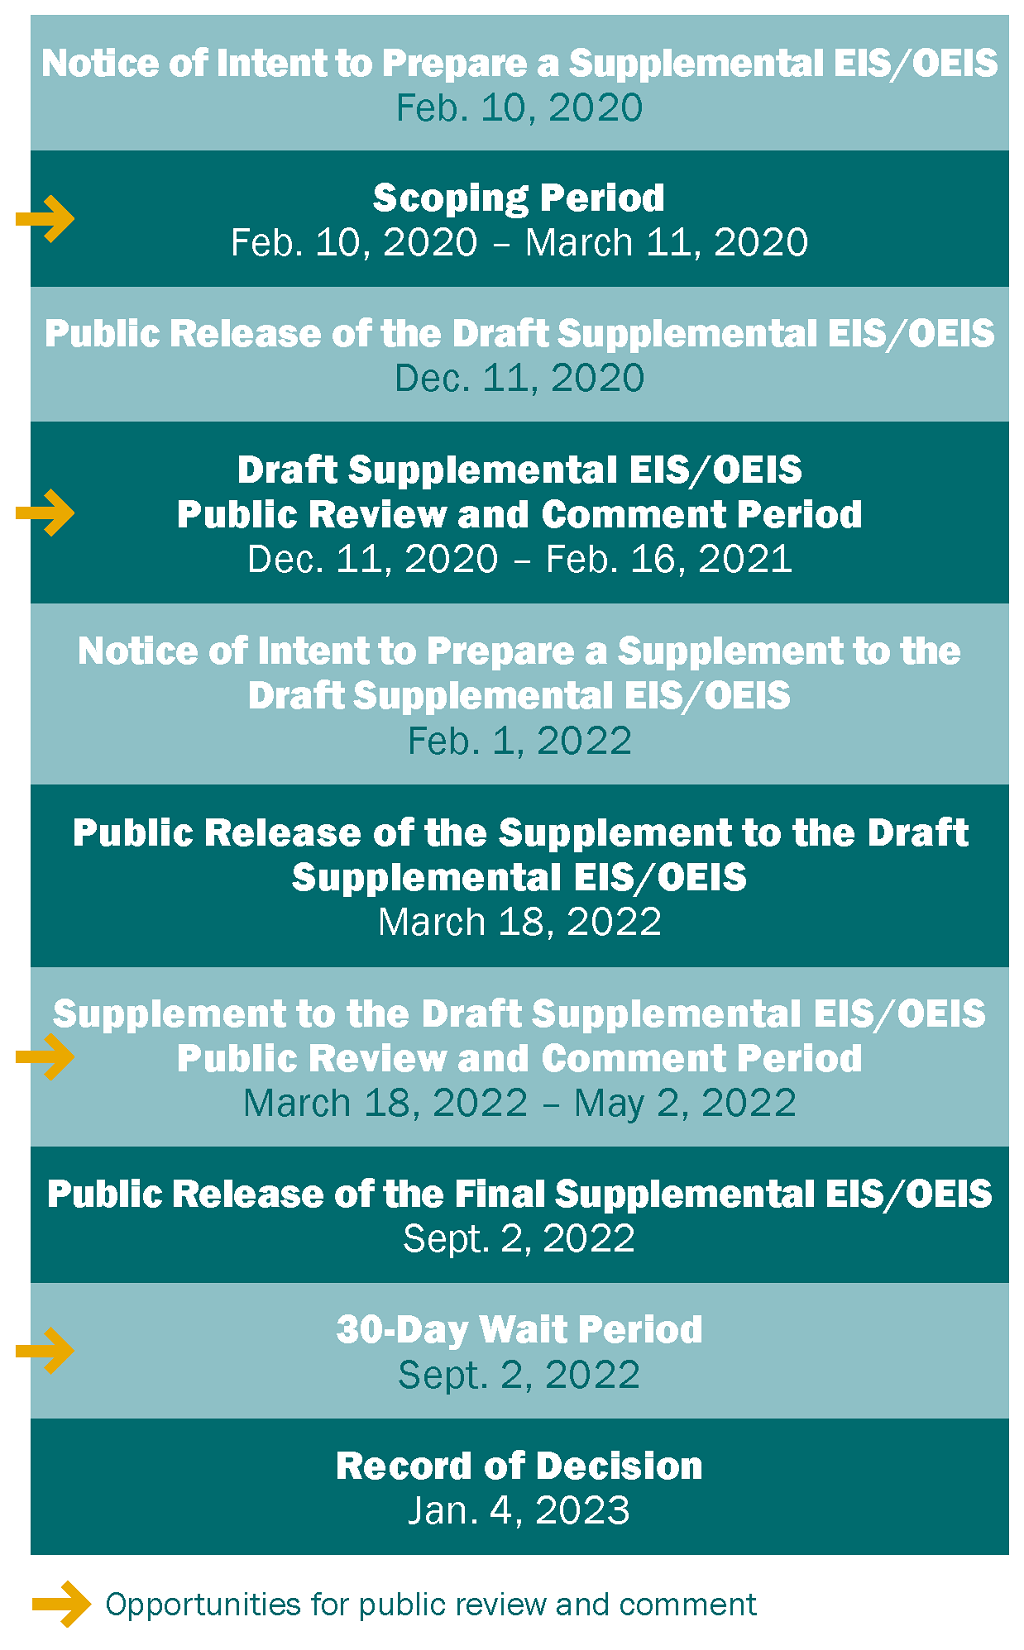 This is a figure showing the National Environmental Policy Act timeline for the Gulf of Alaska Navy Training Activities Draft Supplemental Environmental Impact Statement/Overseas Environmental Impact Statement. The Notice of Intent to Prepare a Supplemental EIS/OEIS was published February 10, 2020. The Scoping Period took place from February 10, 2020, to March 11, 2020, and was an opportunity for public review and comment. The public Release of the Draft Supplemental EIS/OEIS occurred December 11, 2020. The Draft Supplemental EIS/OEIS Public Review and Comment Period is from December 11, 2020, to Feb. 16, 2021, and is an opportunity for public review and comment. The Public Release of the Final Supplemental EIS/OEIS occurred on September 2, 2022, followed by a 30-Day Wait Period, which is another opportunity for public review and comment. The Record of Decision is available January 4, 2023.